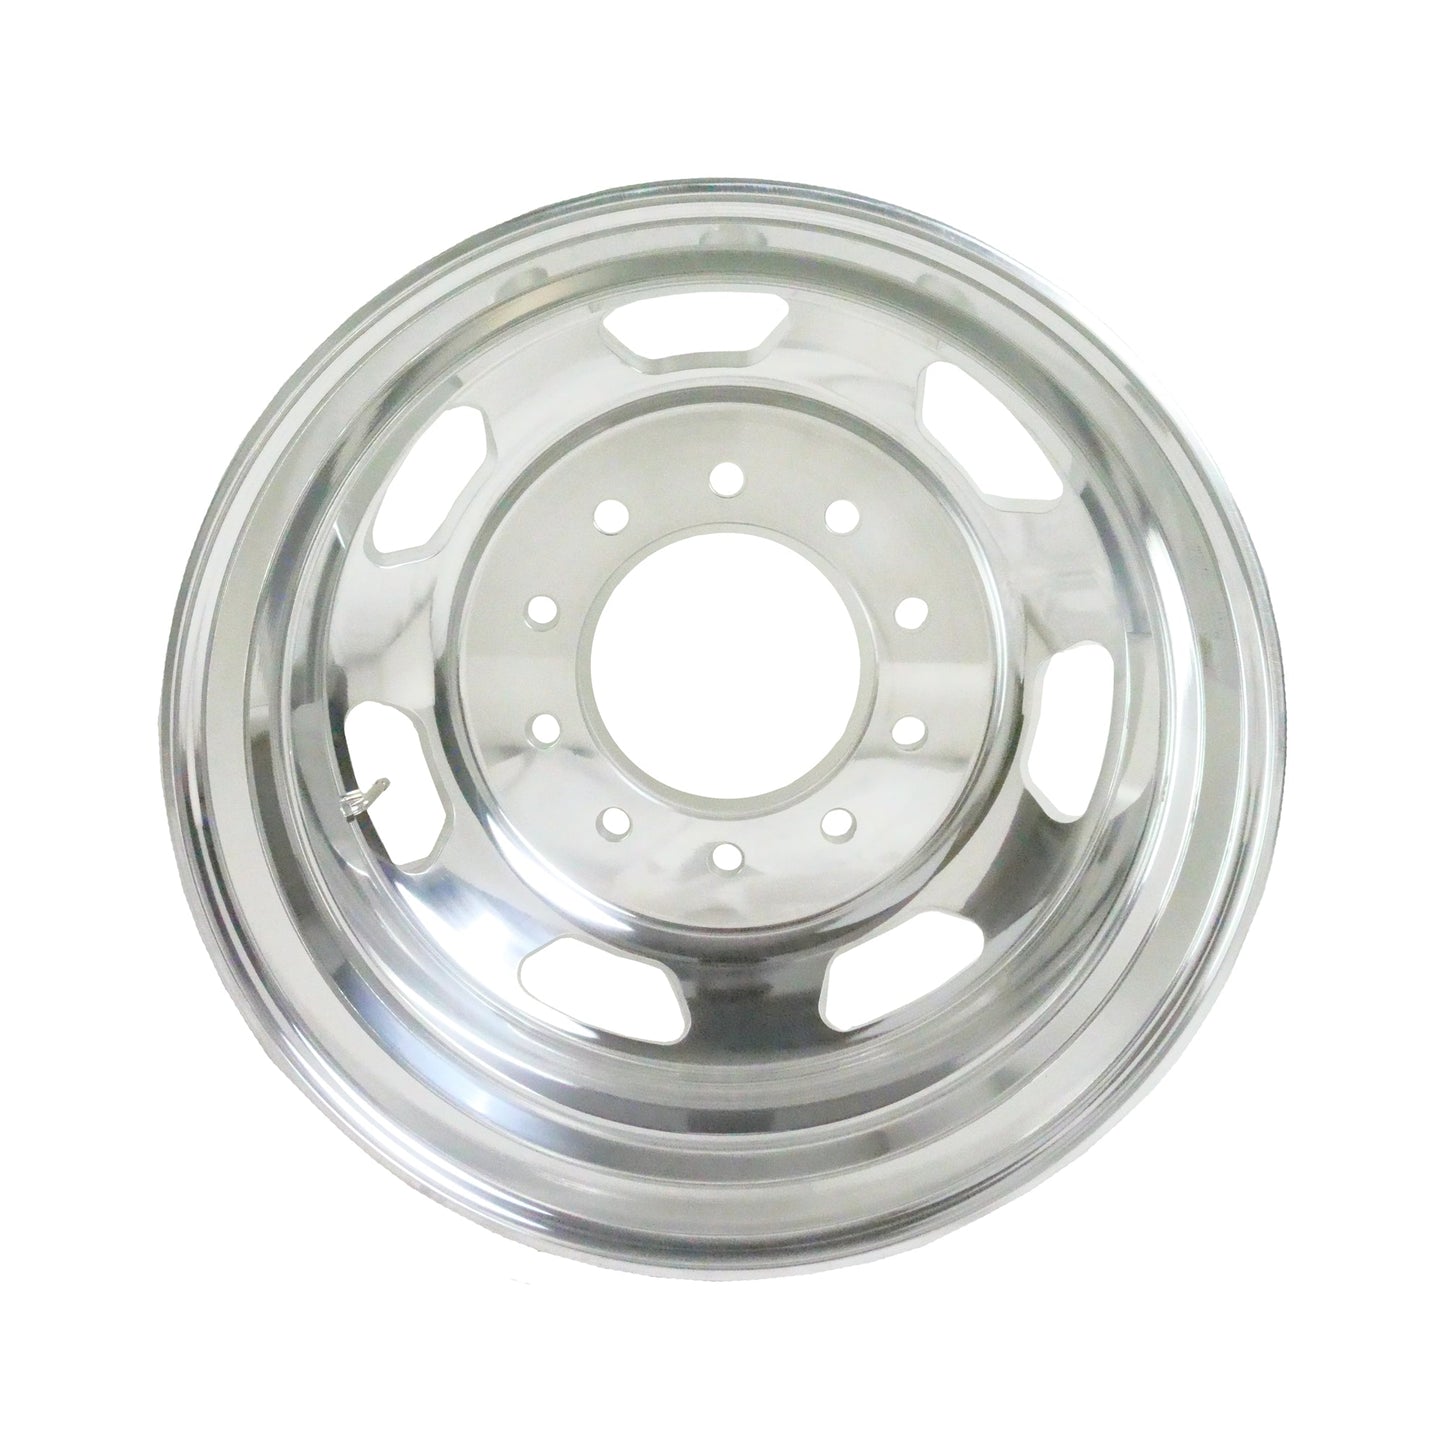 22.5 x 8.25 Kenworth Truck Wheels OEM-Stylized DDP (Delivered Duty Paid)  WHOLESALE PRICE $189/pc 600 pcs